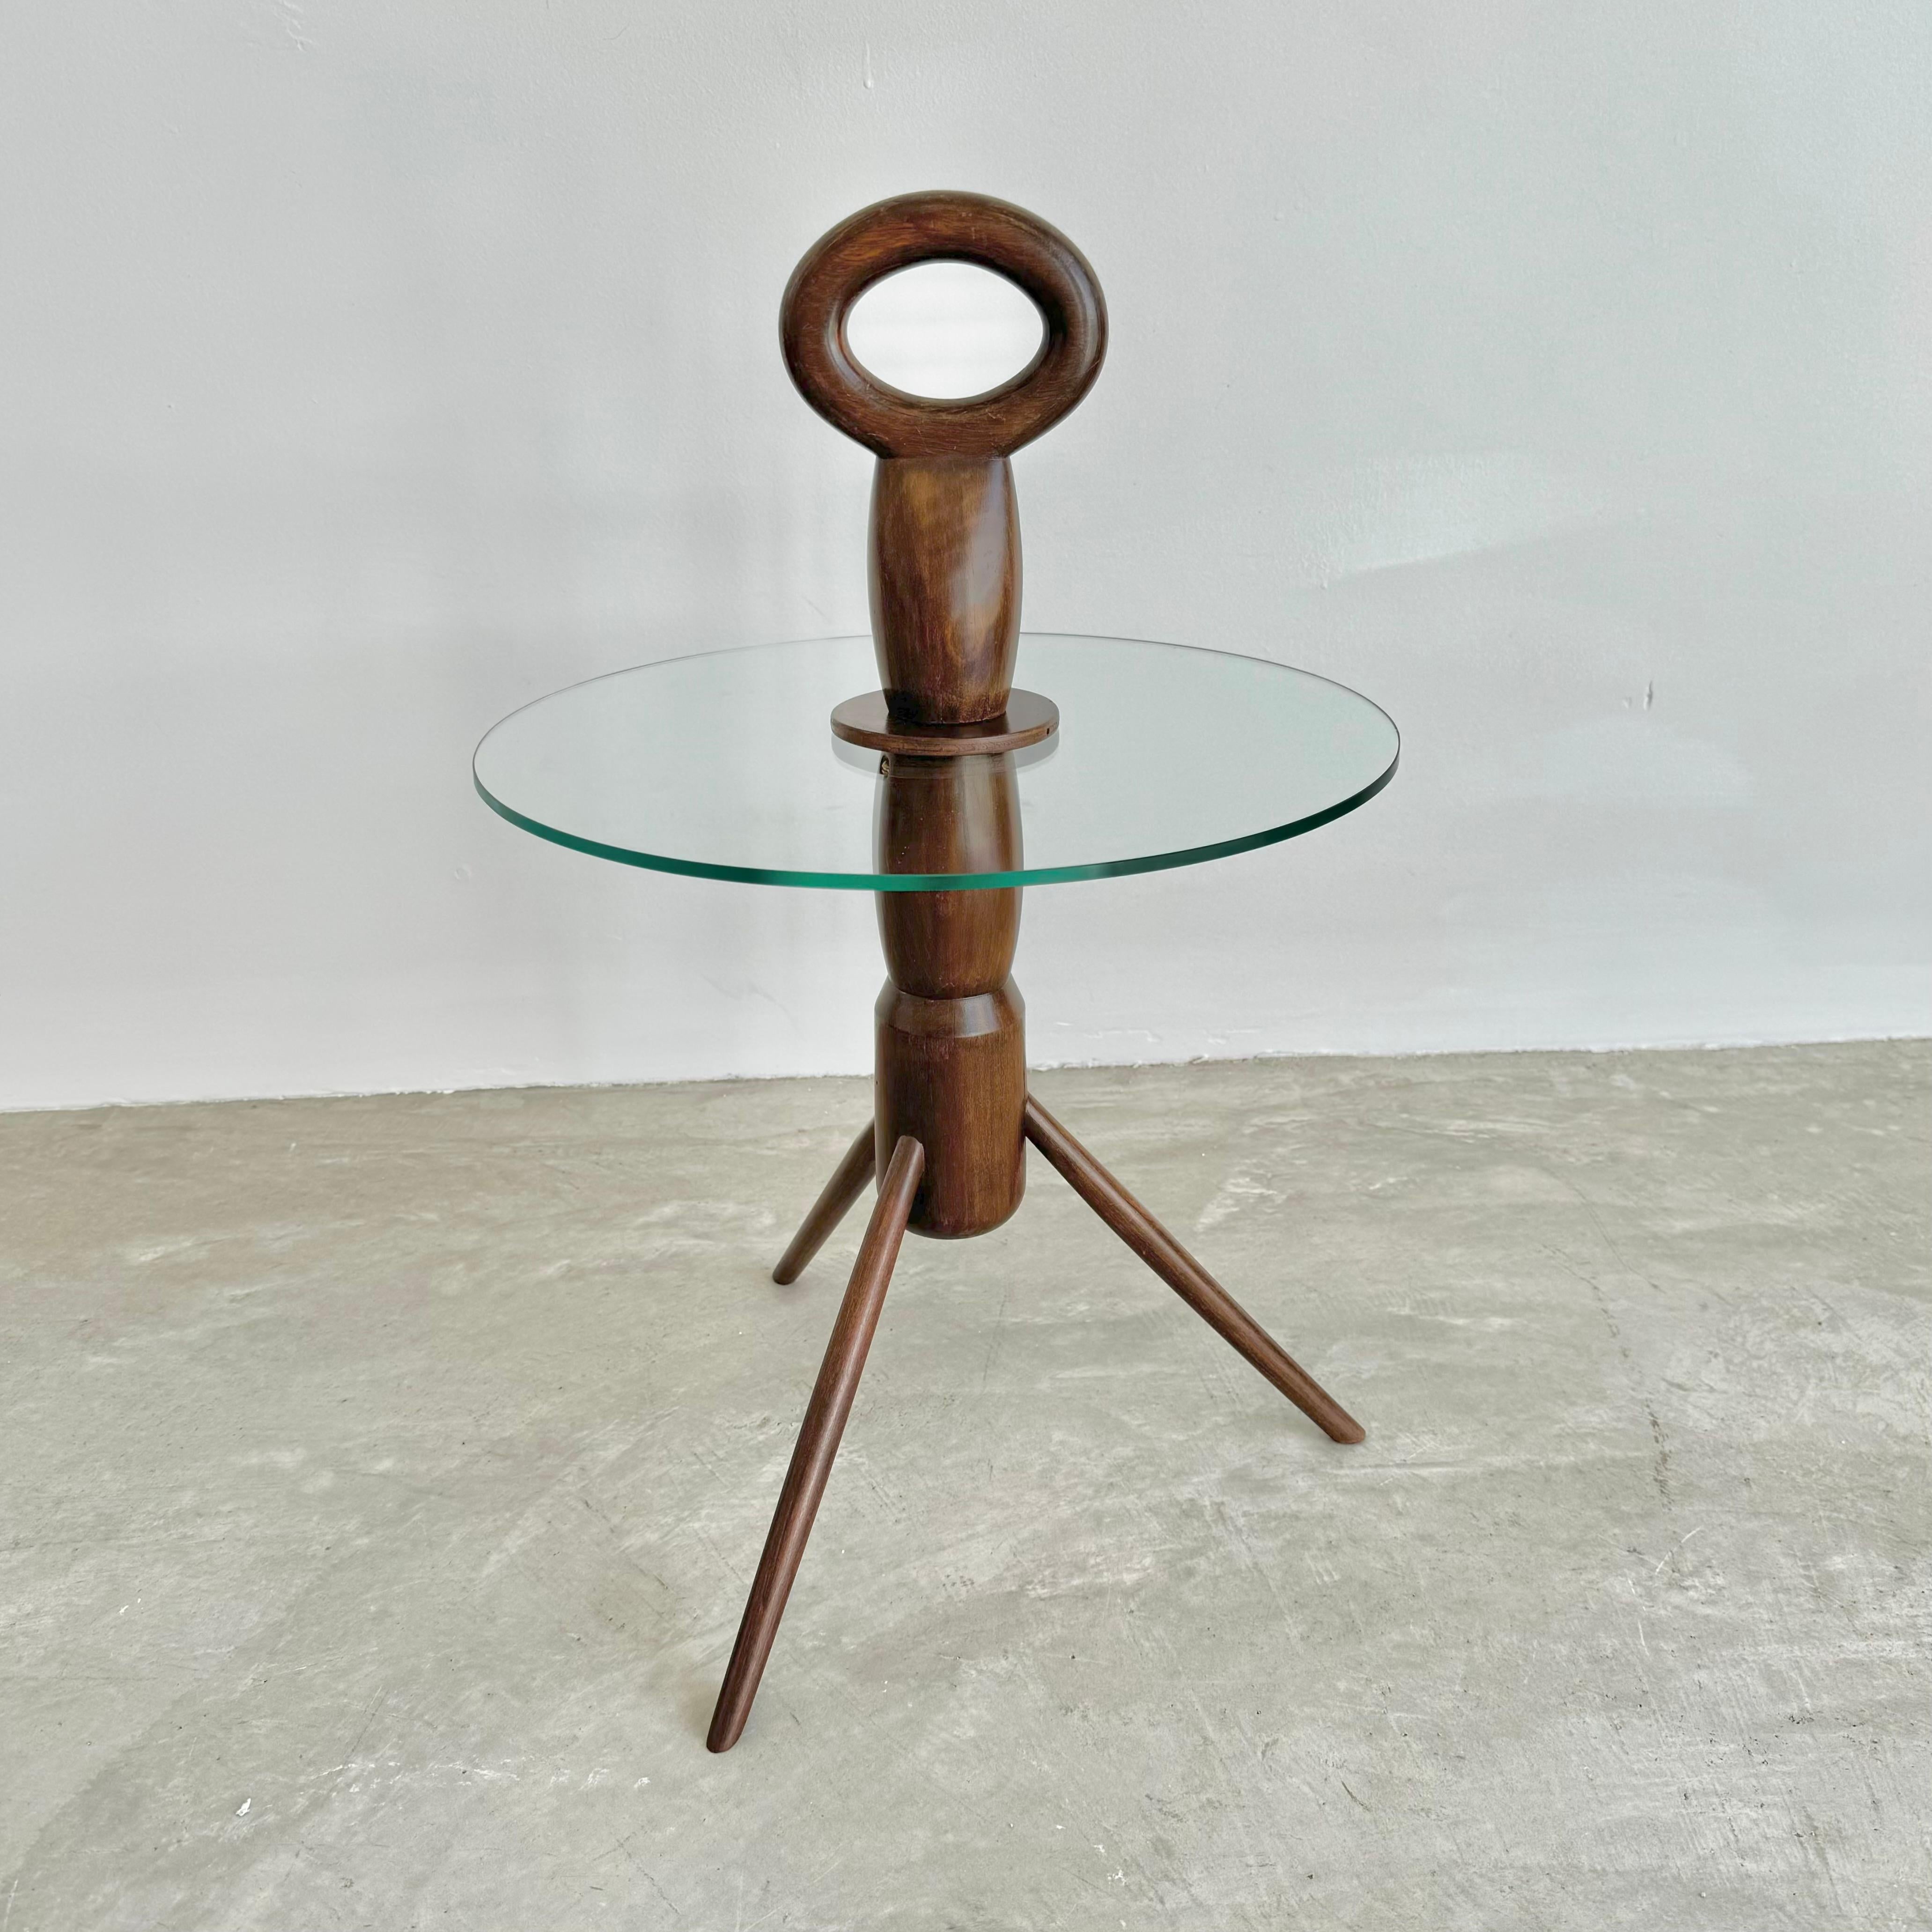 Classic wood and glass side table with tripod feet. Elegant dark wood body with a large oval handle atop. Round 1/4